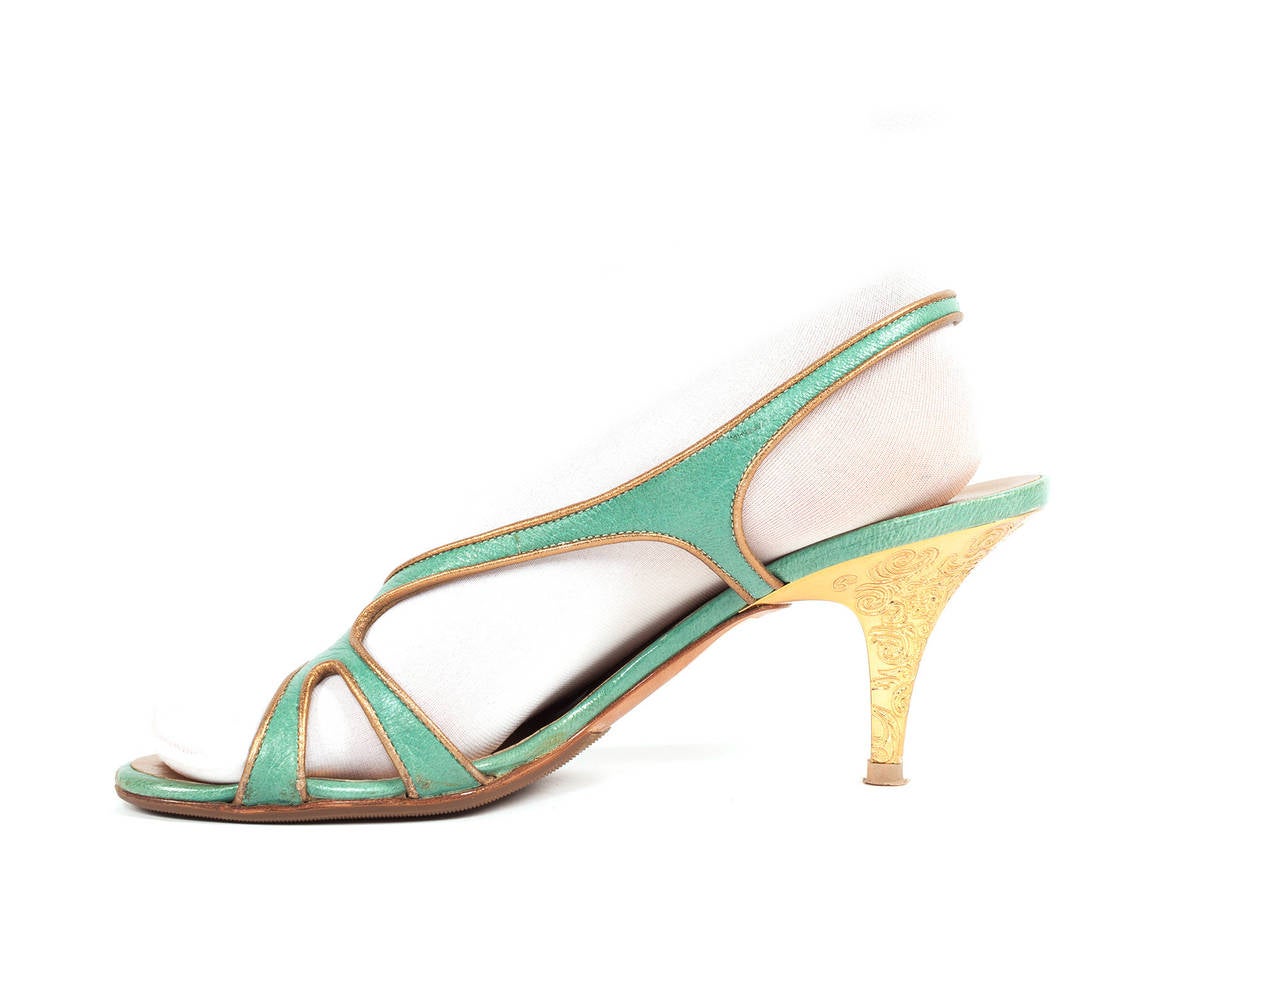 Women's Escada Celadon green sling back heels with gold interior, Sz. 8.5 For Sale